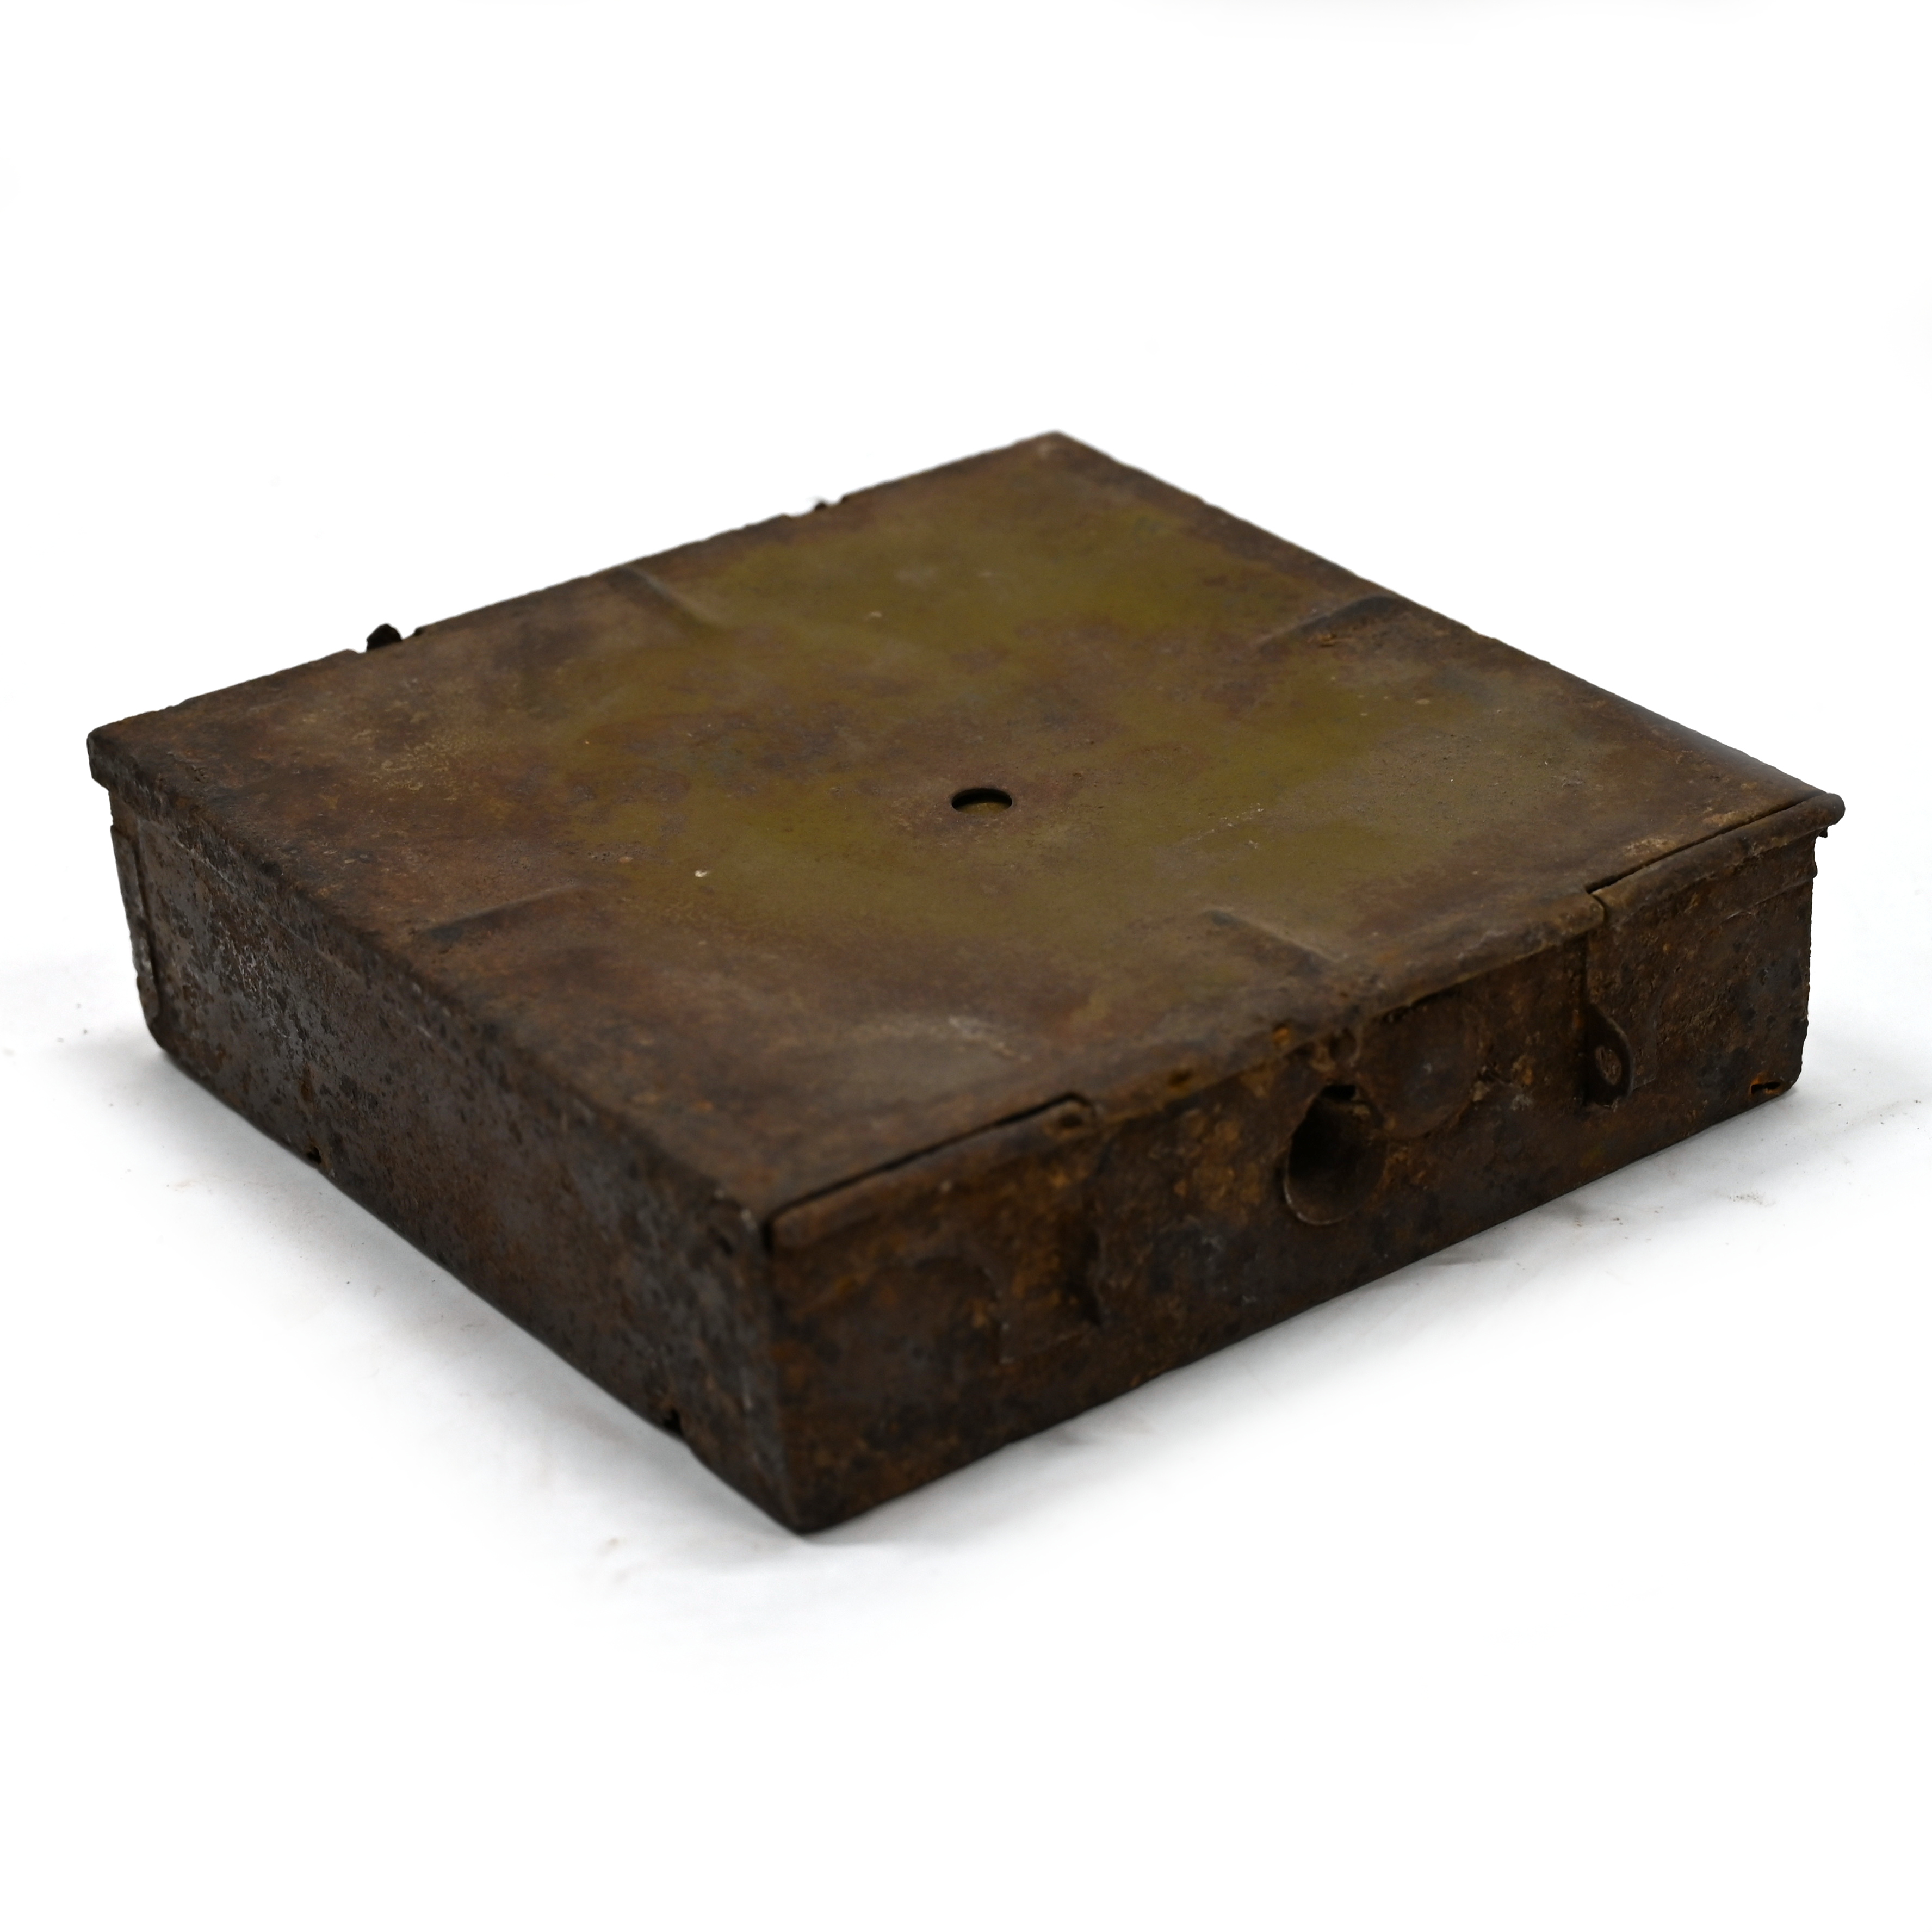 TM-35 Soviet anti-tank mine, World War Two-era, in dug condition. Dimensions: 22.5cm wide by 22.5... - Image 2 of 3